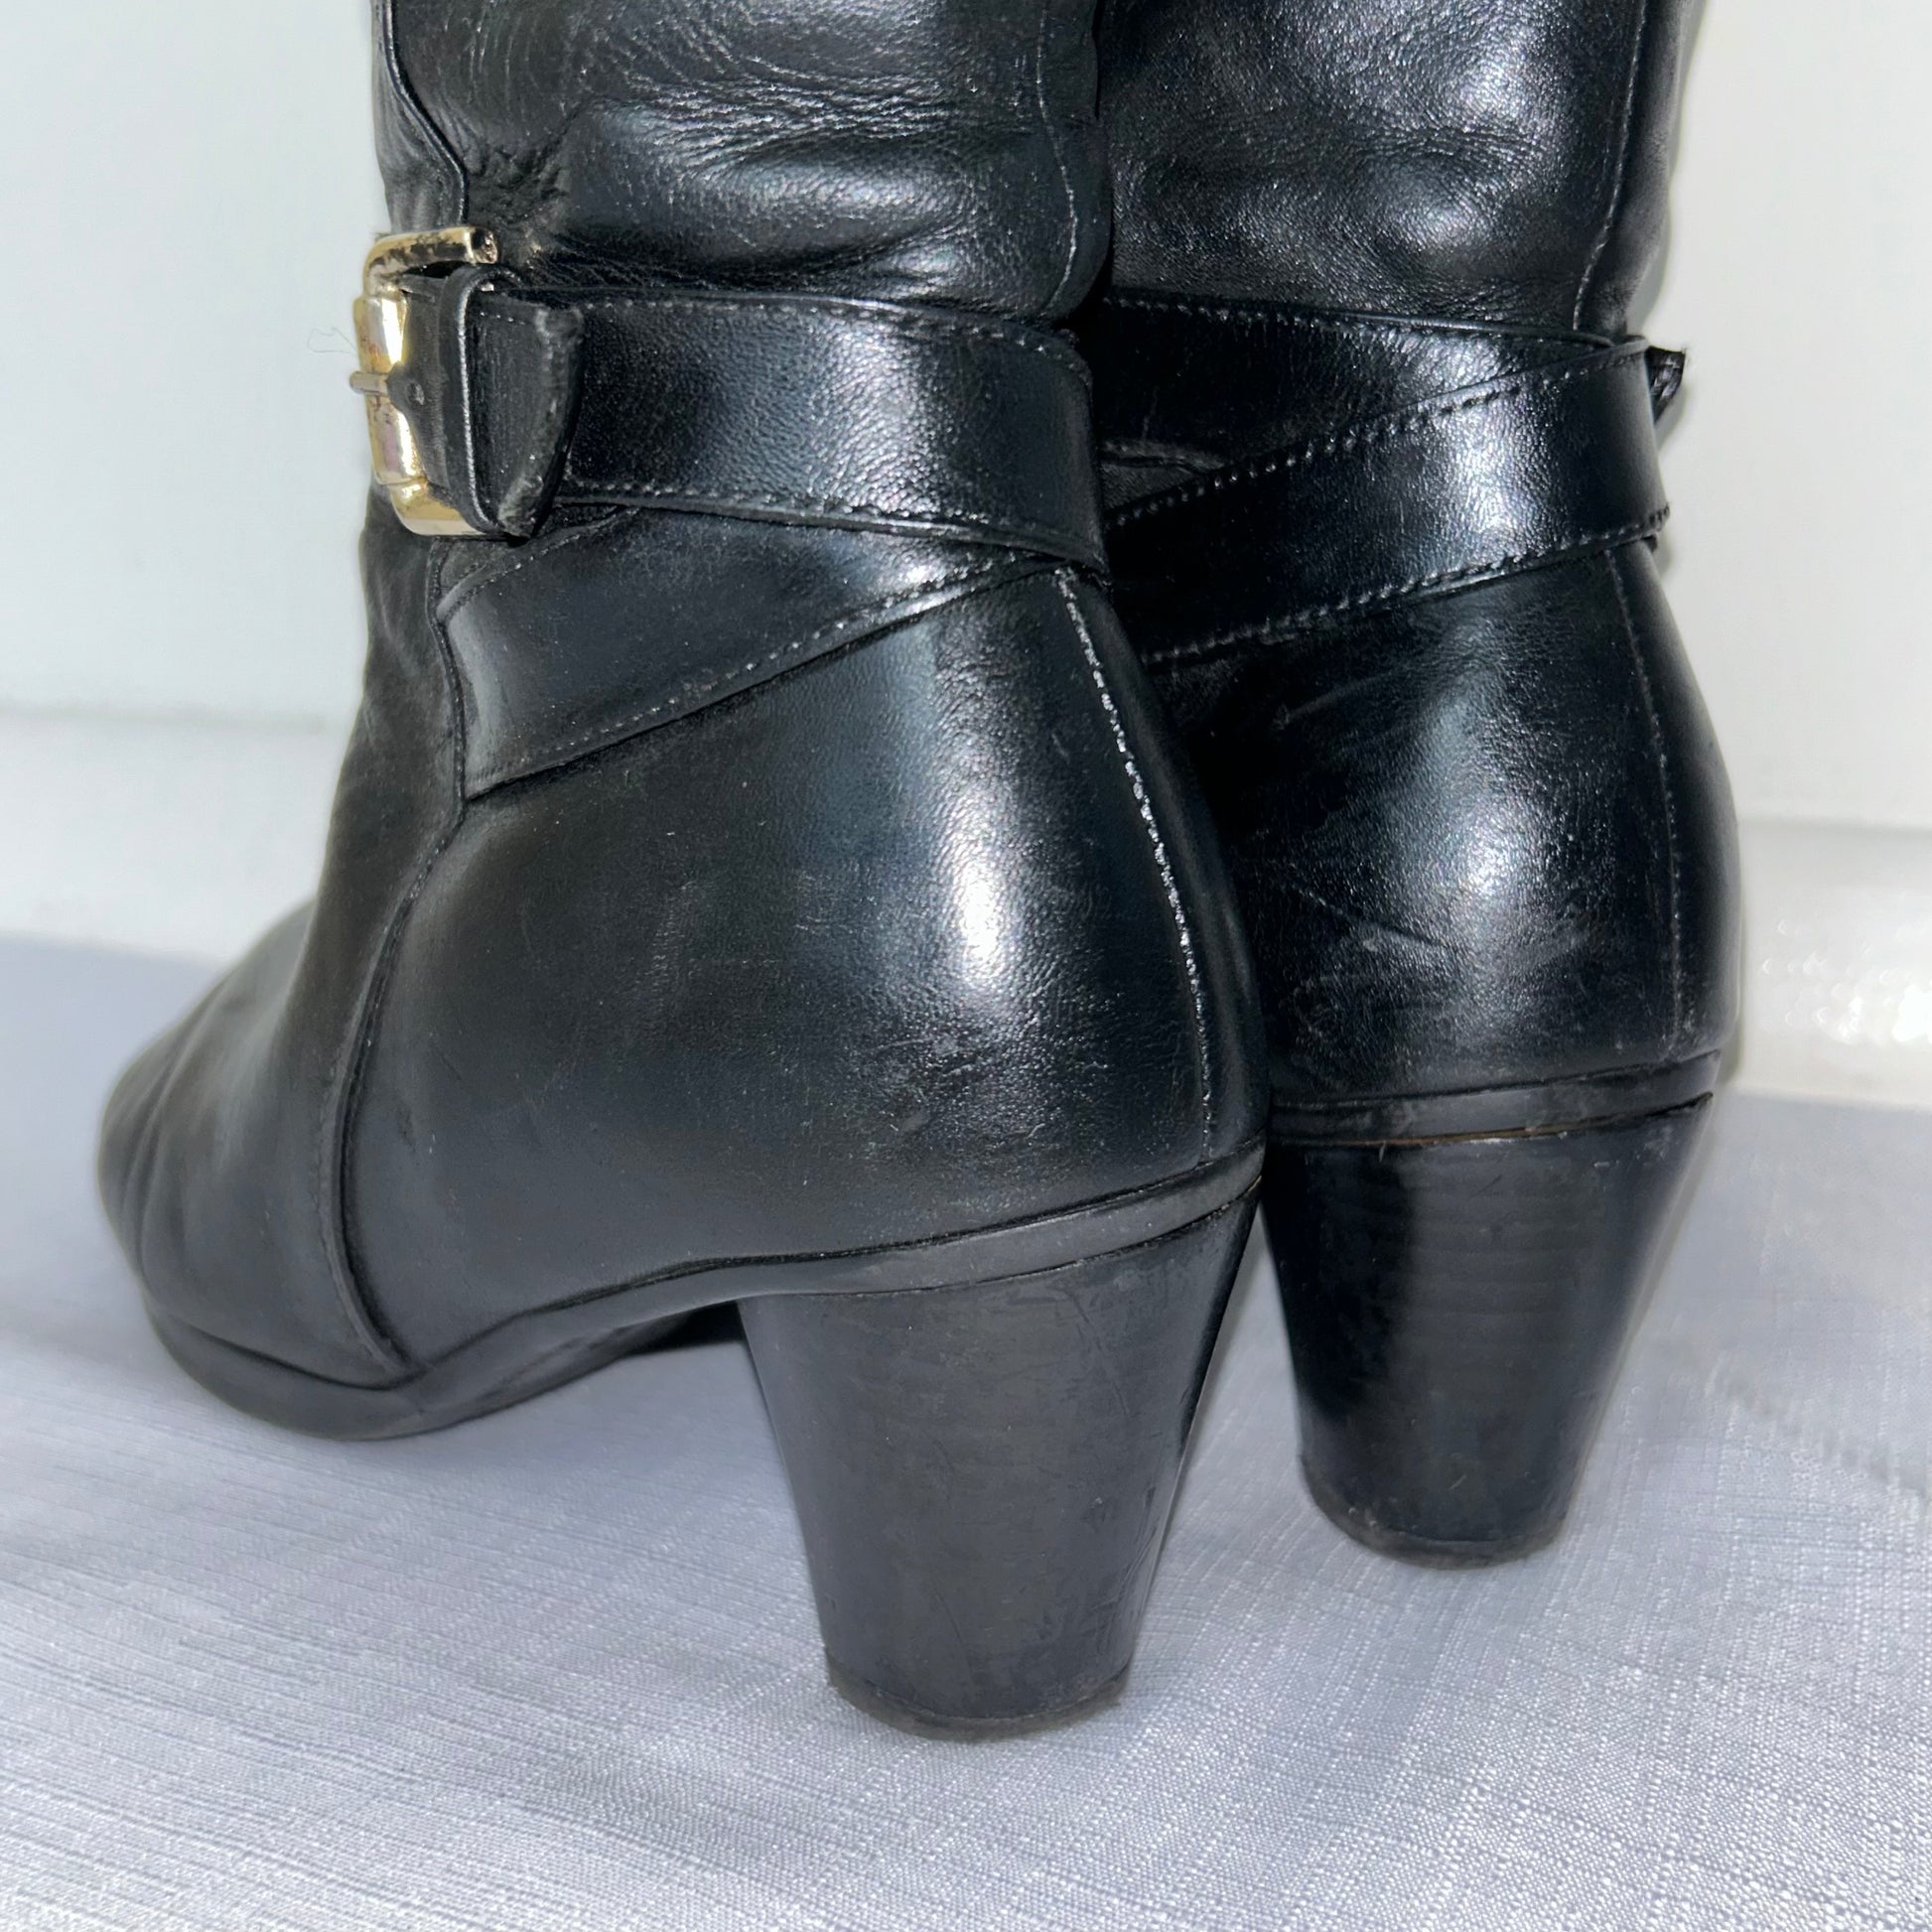 heels of black knee high silver buckle boots shown on a white background